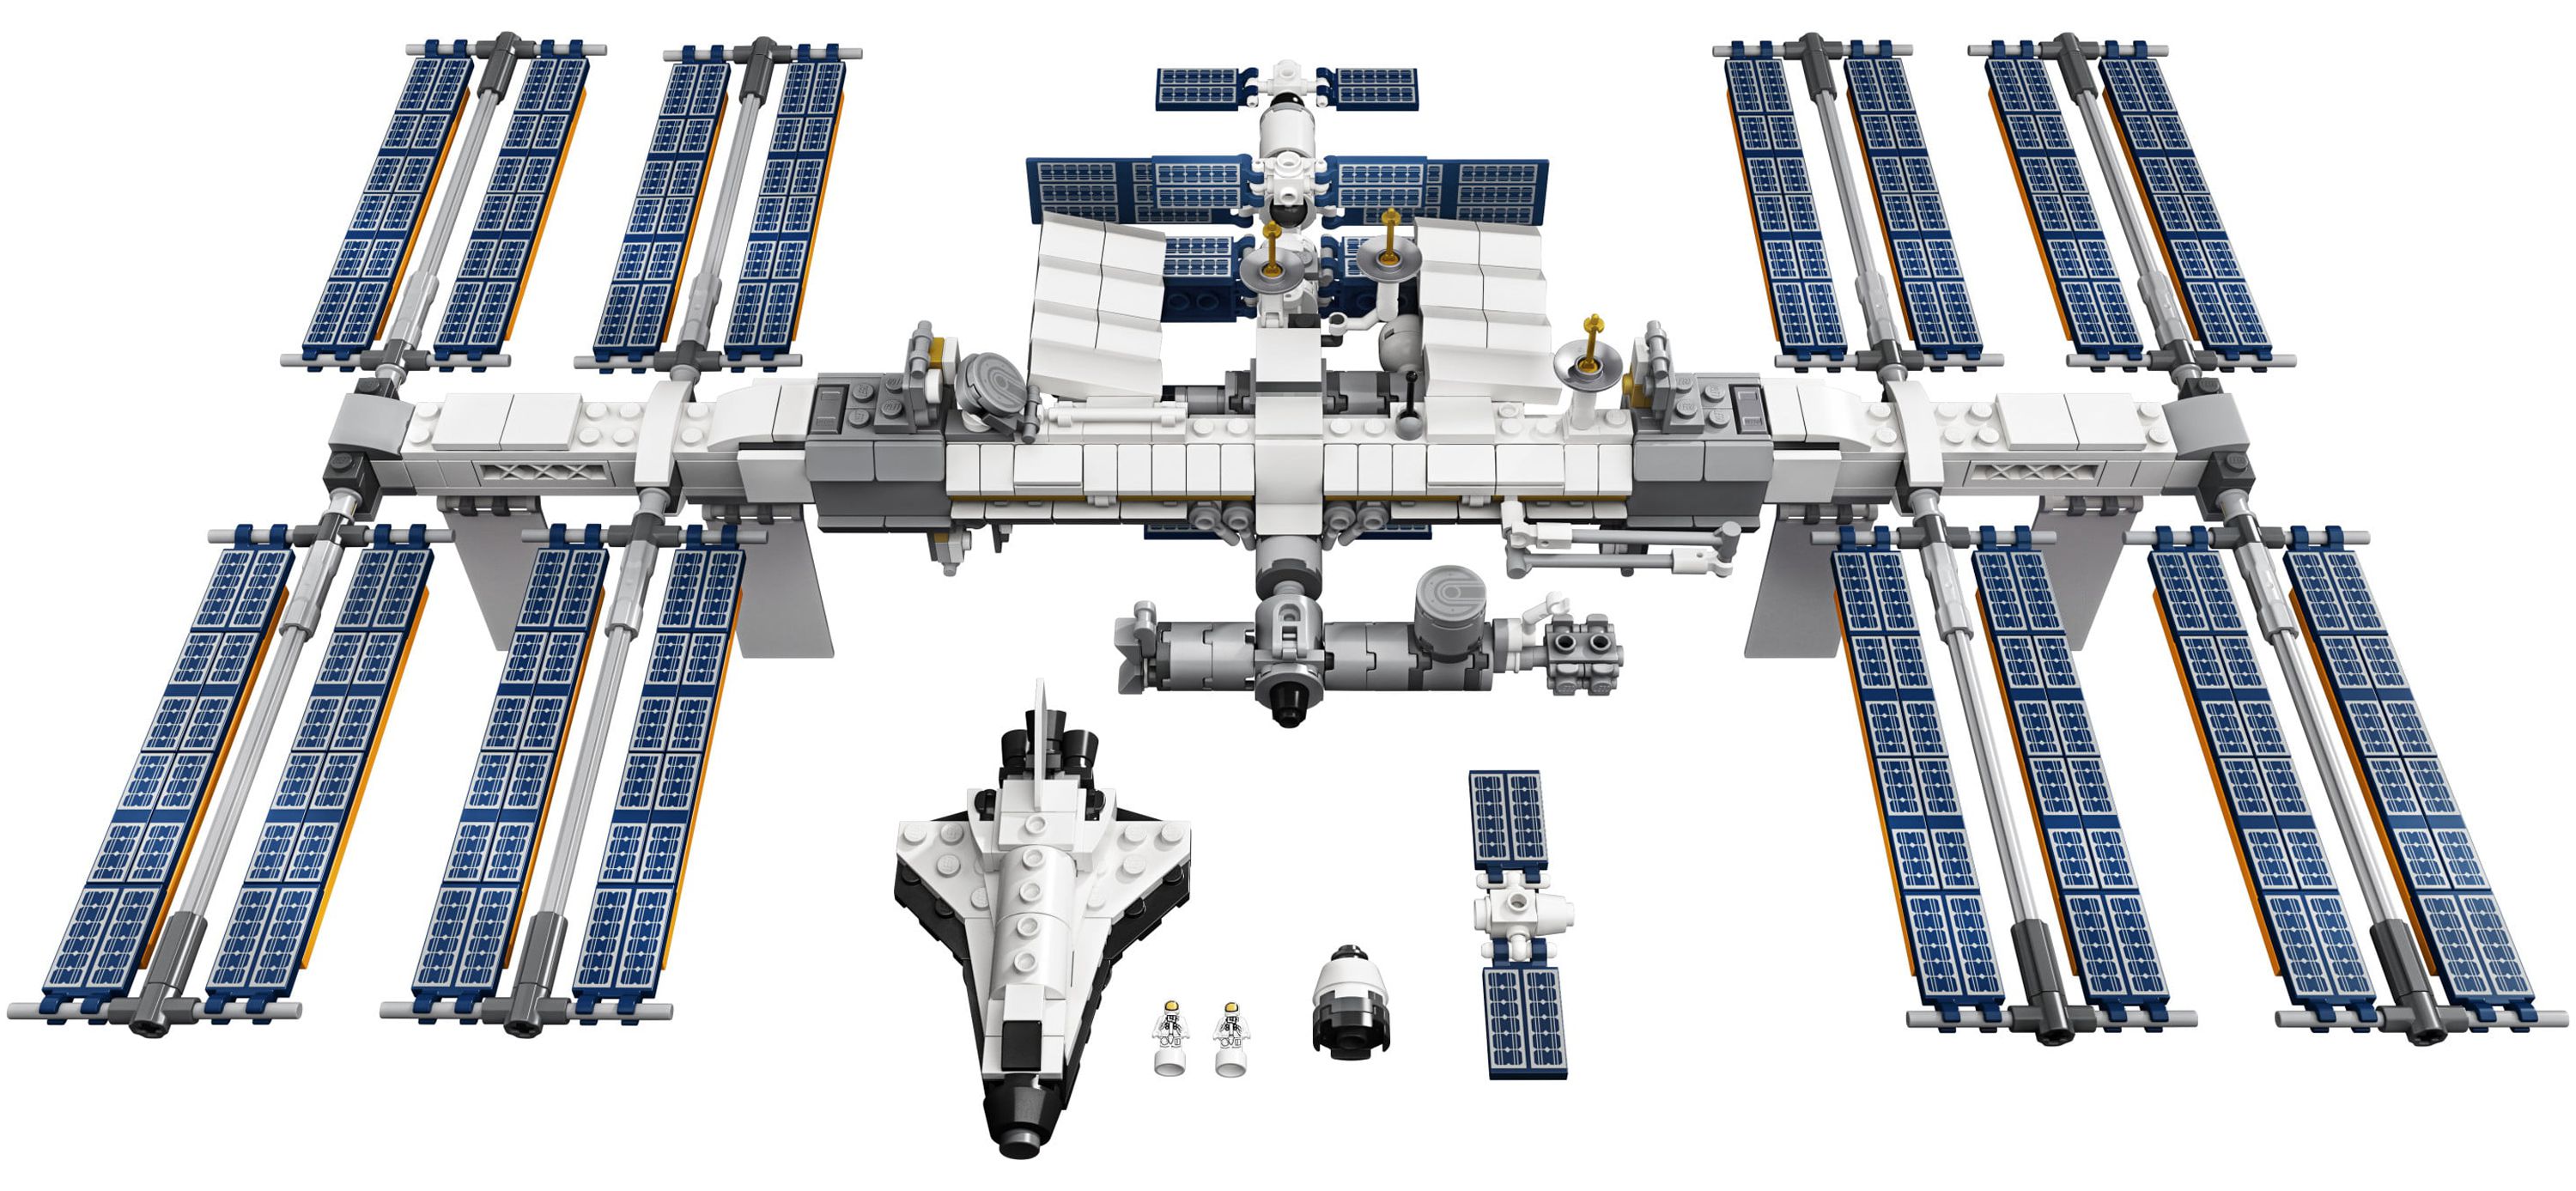 LEGO Ideas International Space Station 21321 Building Kit, Adult LEGO Set for Display (864 Pieces) - image 3 of 7